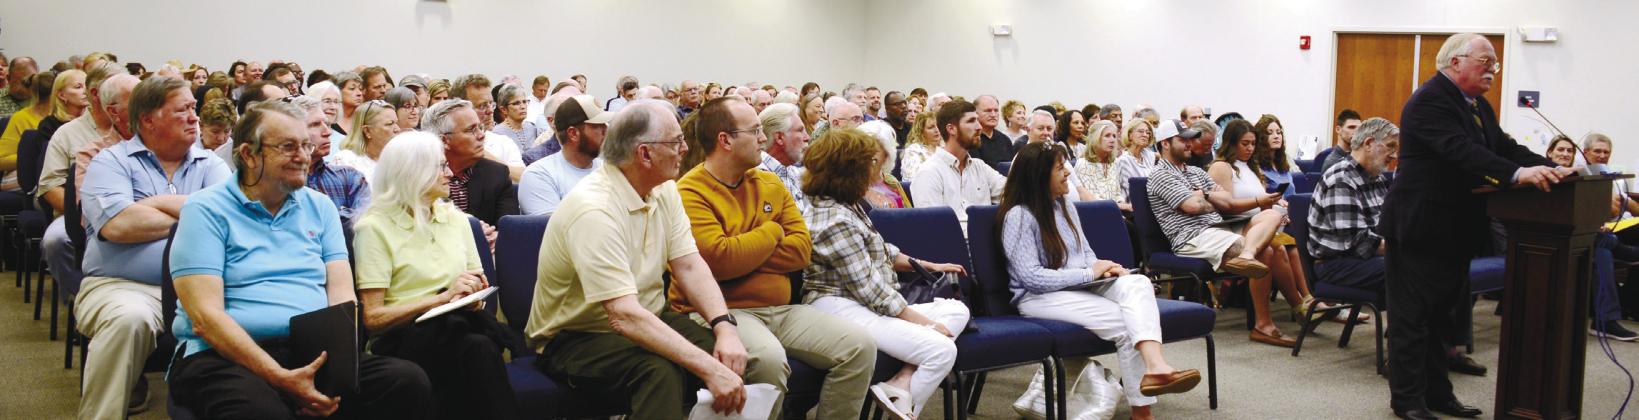 Putnam County Sheriff Howard Sills (at podium) was the first to speak in front of a crowded meeting about short-term rentals last Thursday at the county commission building last Thursday. IAN TOCHER/Staff